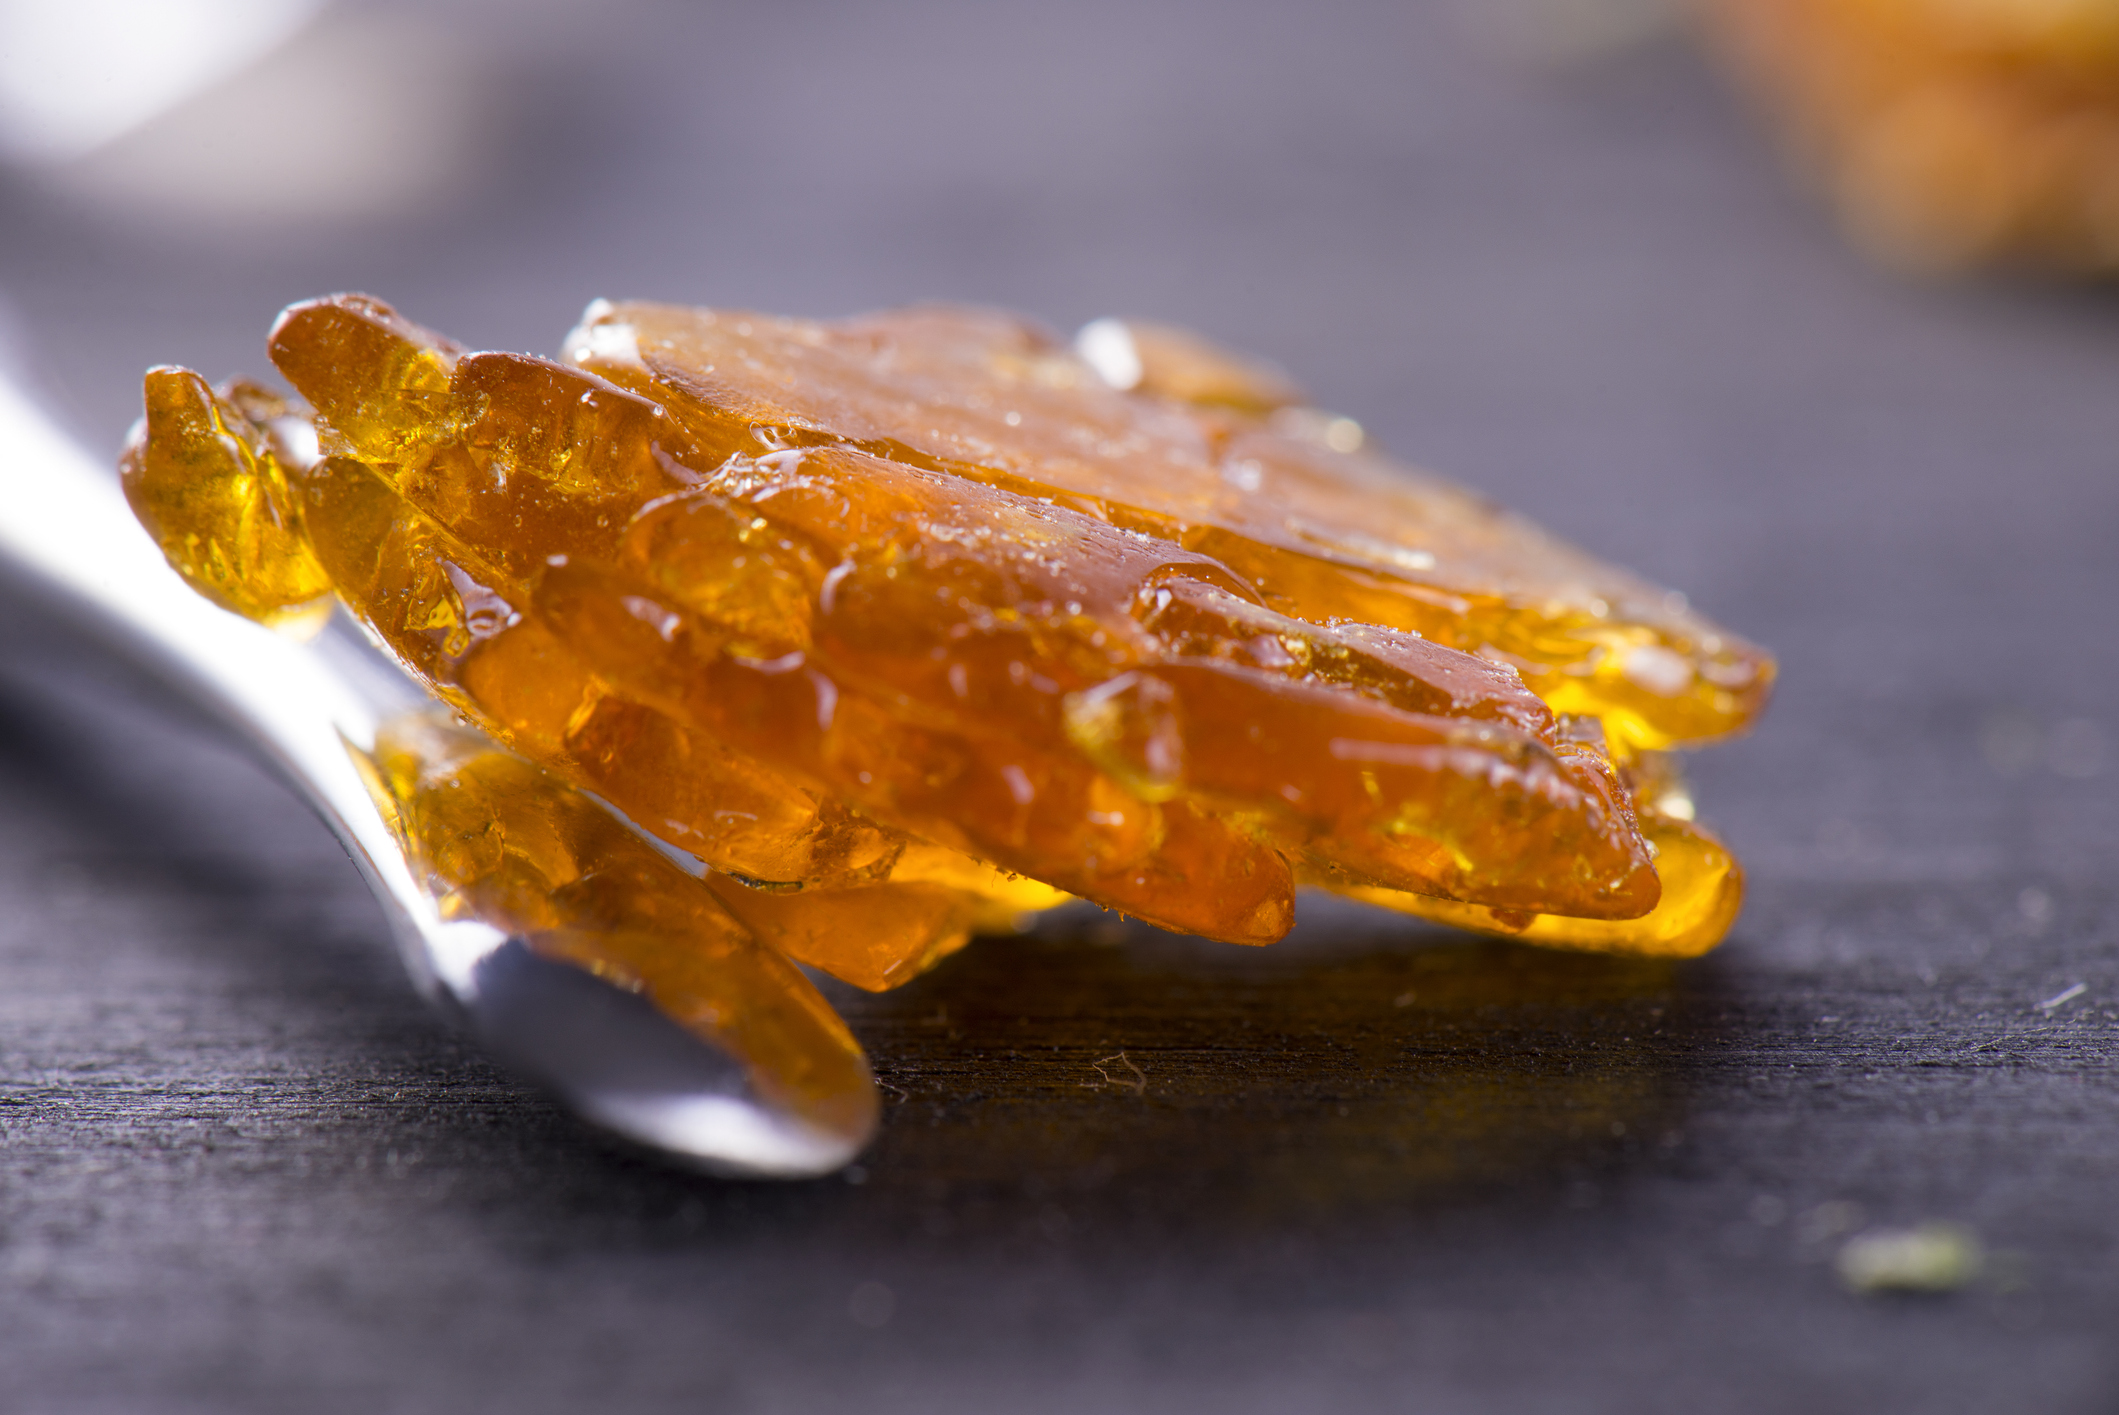 Colorado Is Trying to Implement 15% THC Cap on High-Potency Cannabis Concentrates